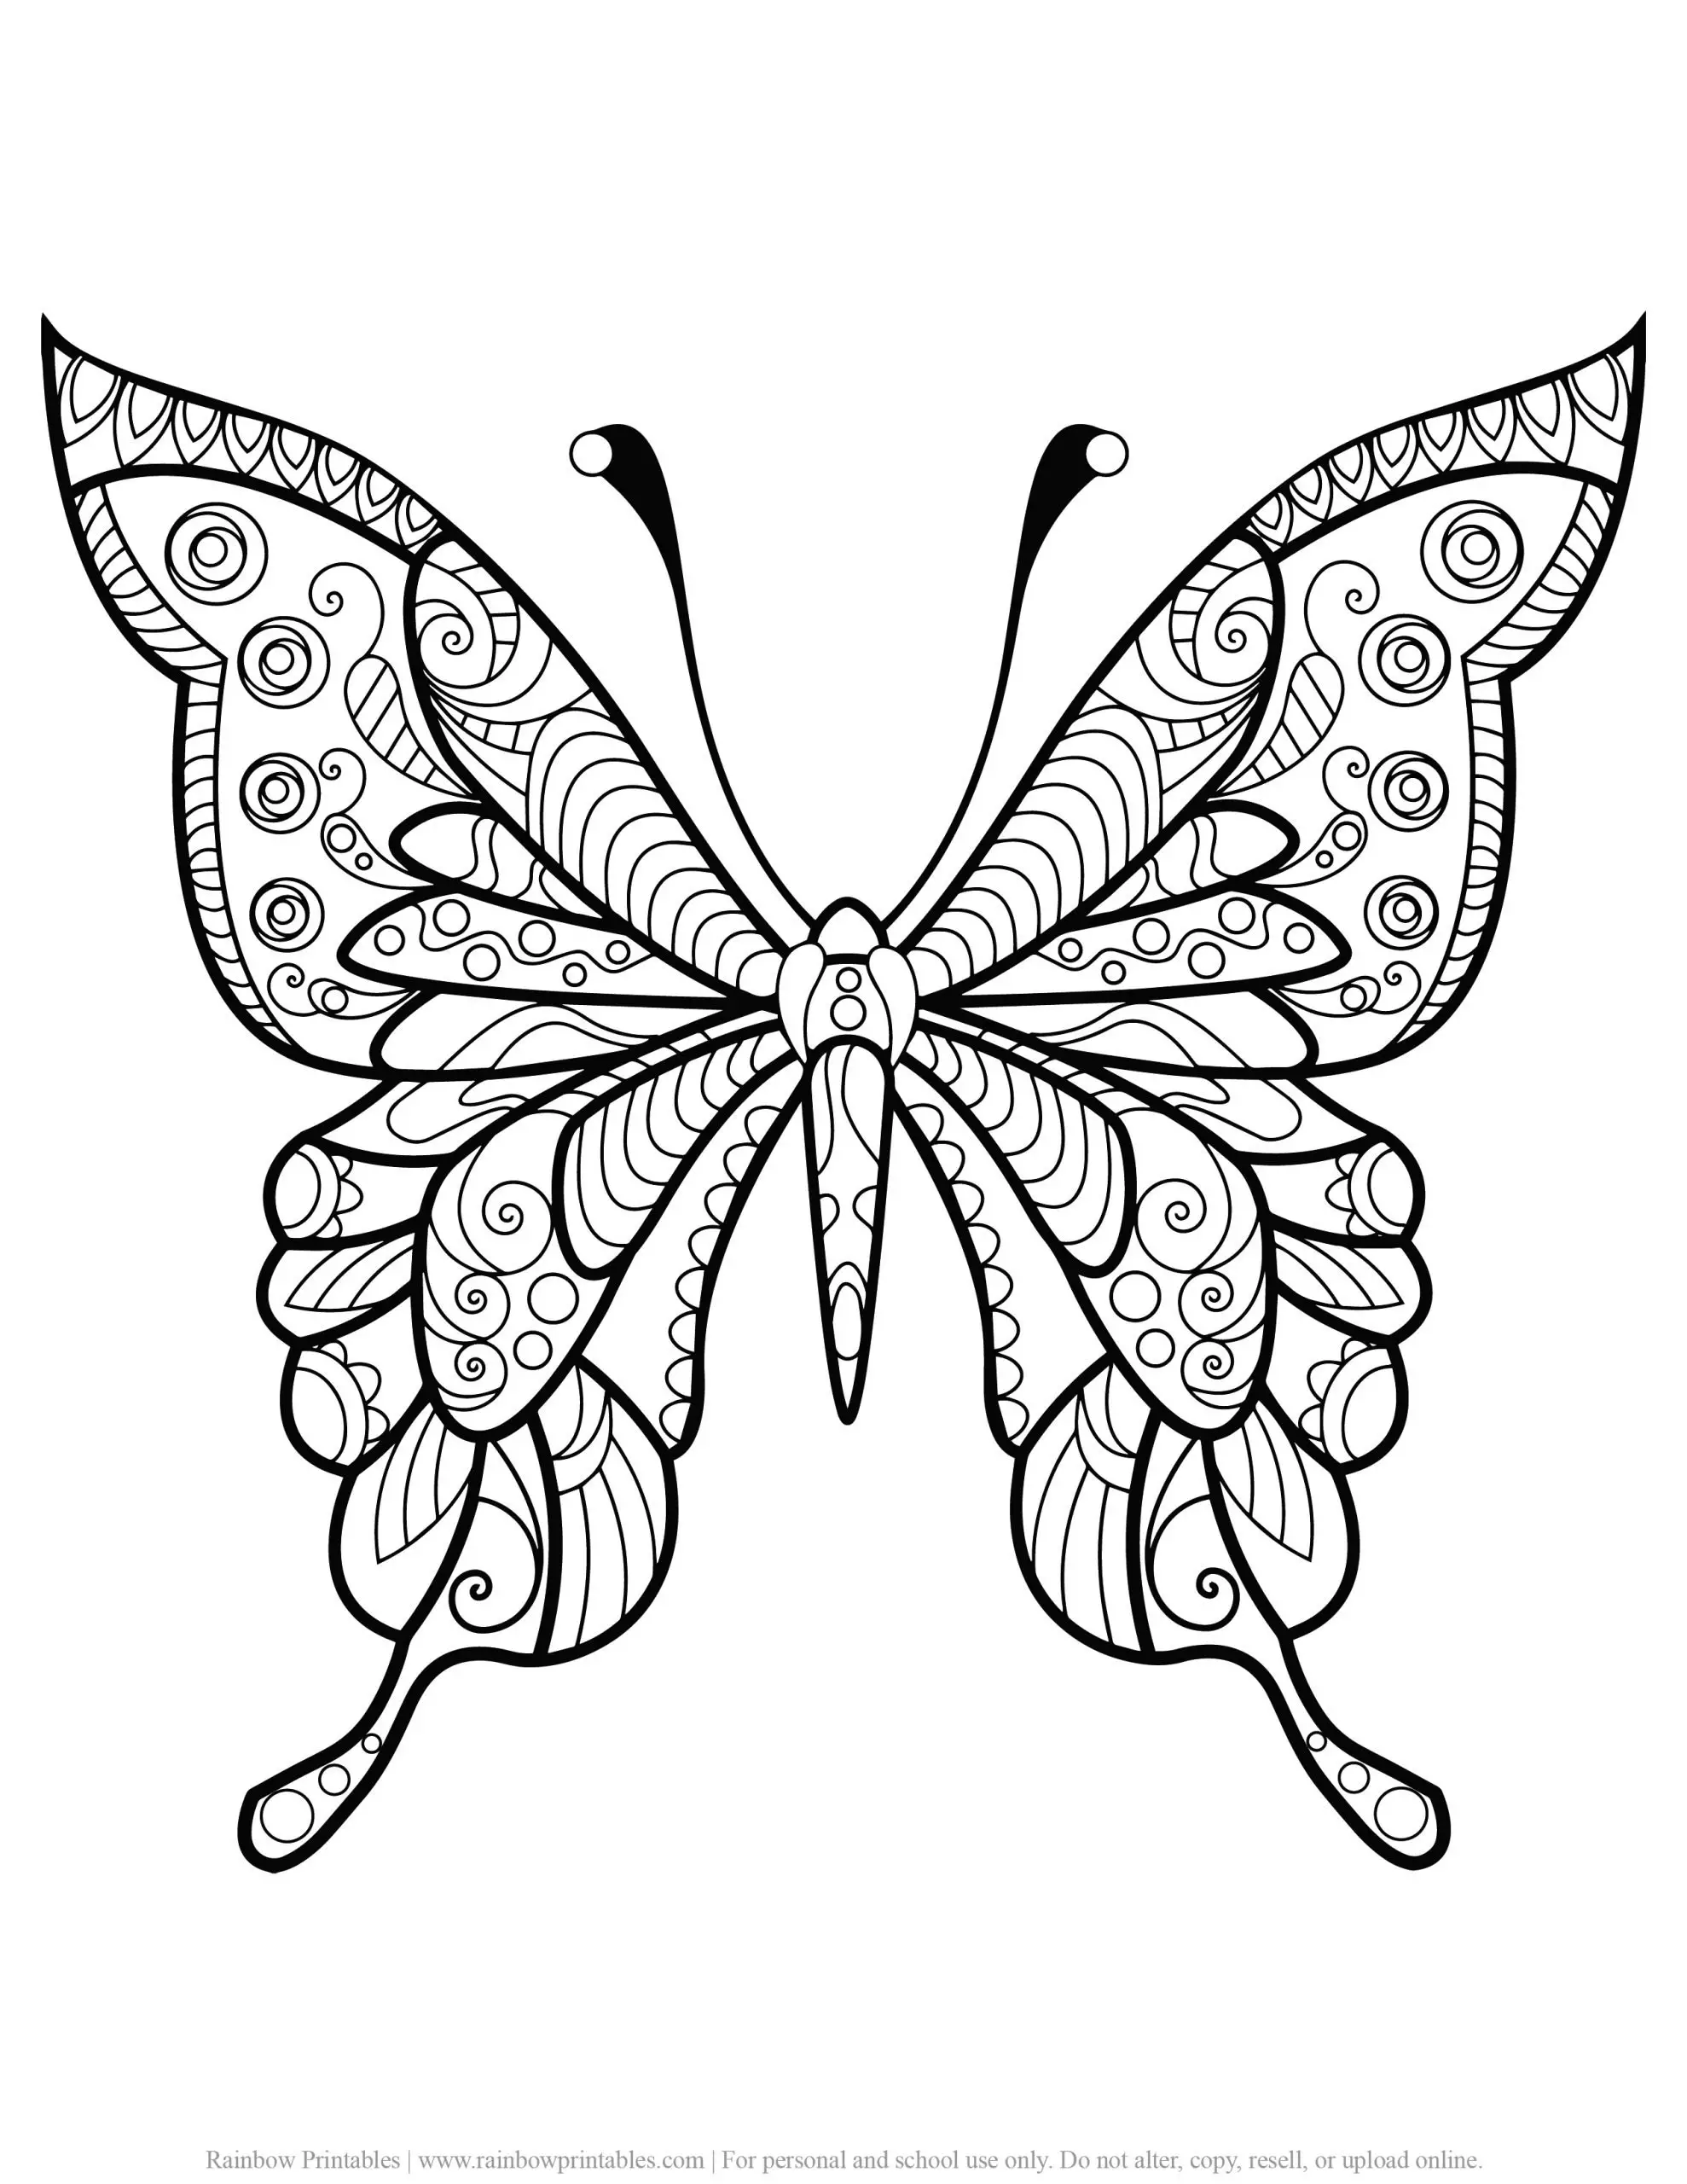 Butterfly Mandala Pattern Coloring Page - Rainbow Printables